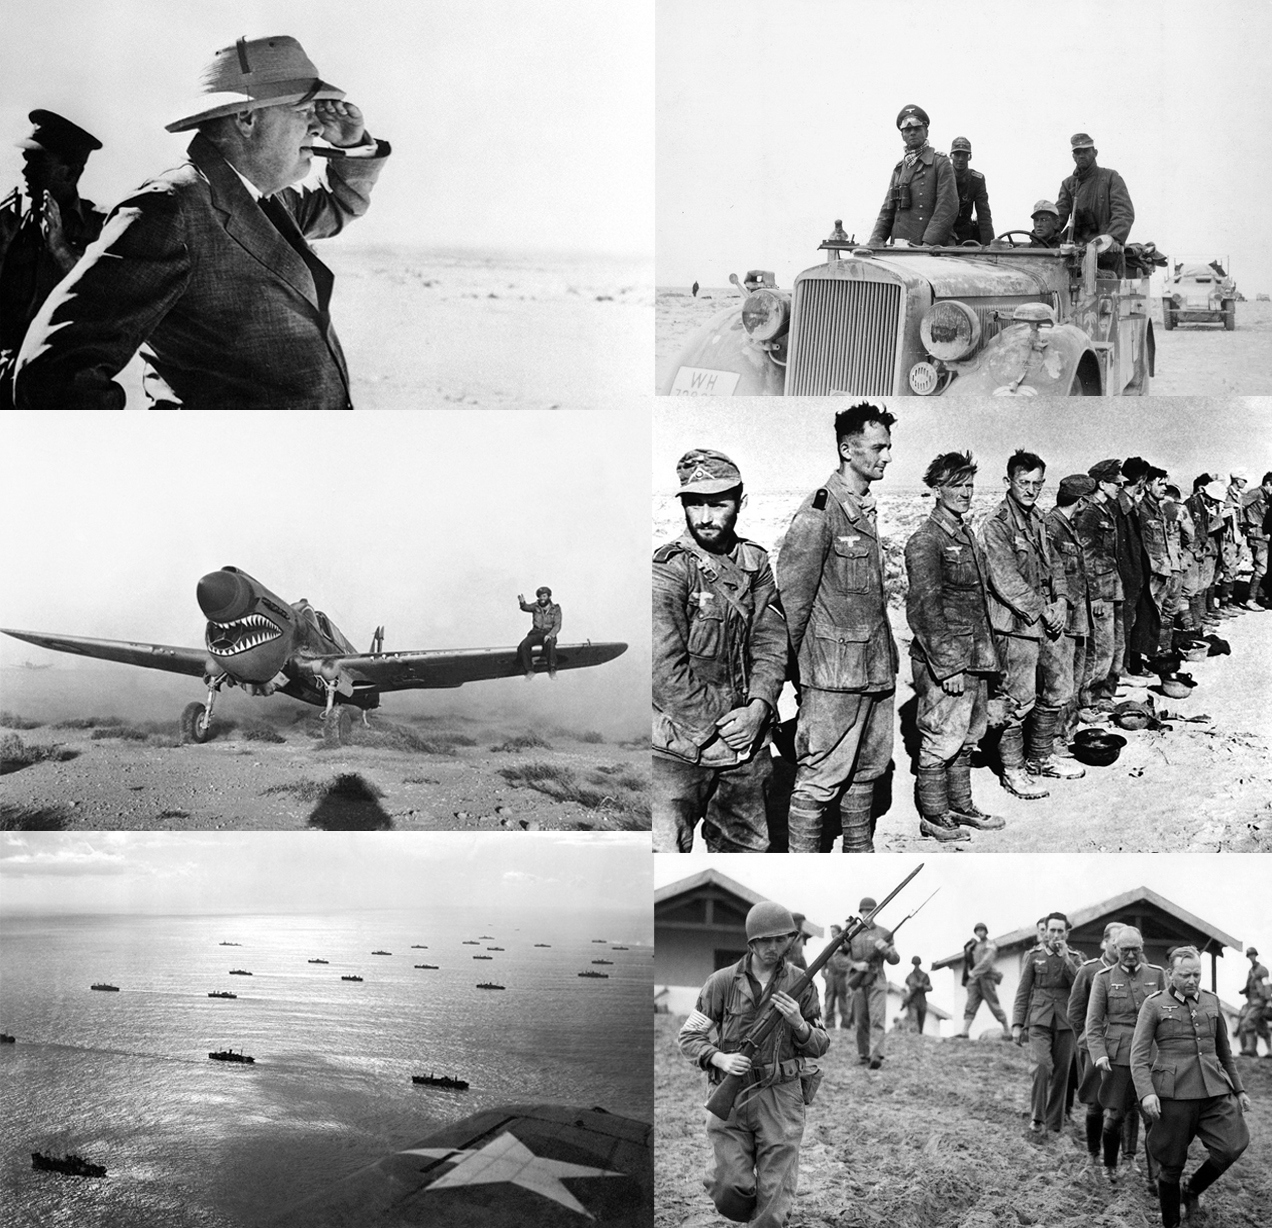 Second Battle of El Alamein: General Field Marshal Erwin Rommel begins a retreat of his forces after a costly defeat on November 04, 1942